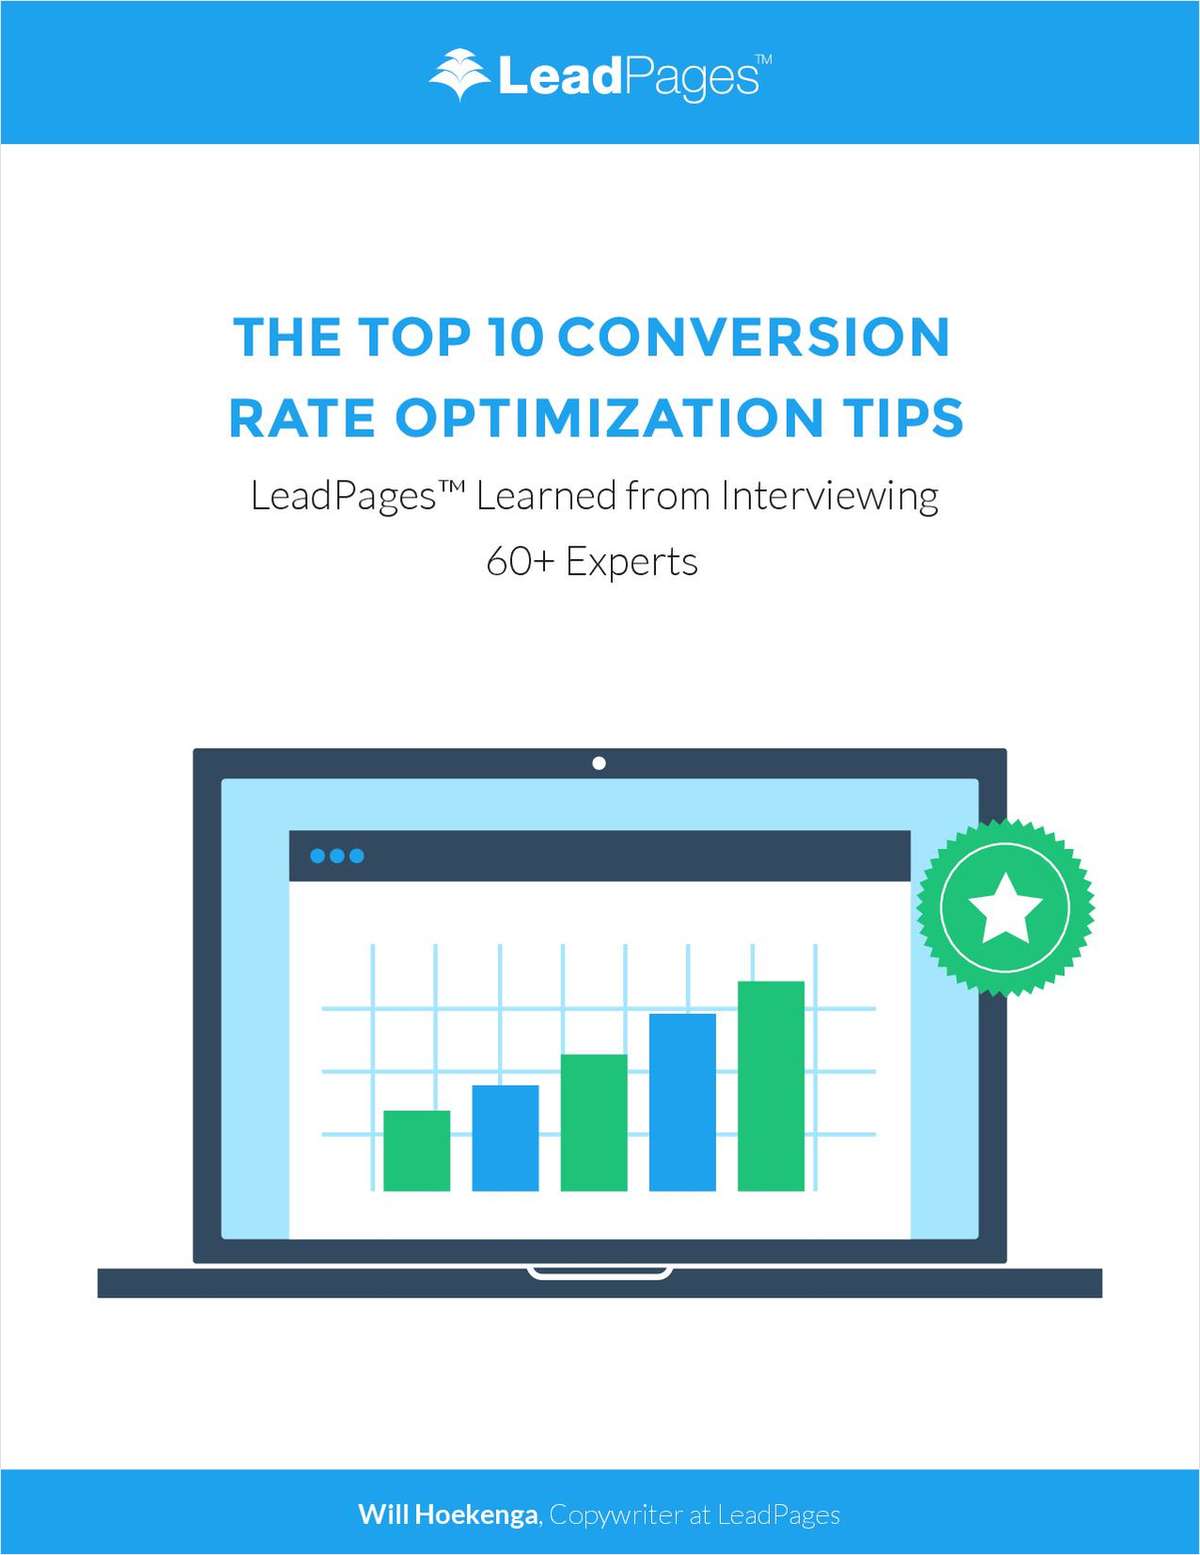 The Top 10 Conversion Rate Optimization Tips LeadPages Learned from Interviewing 60+ Experts